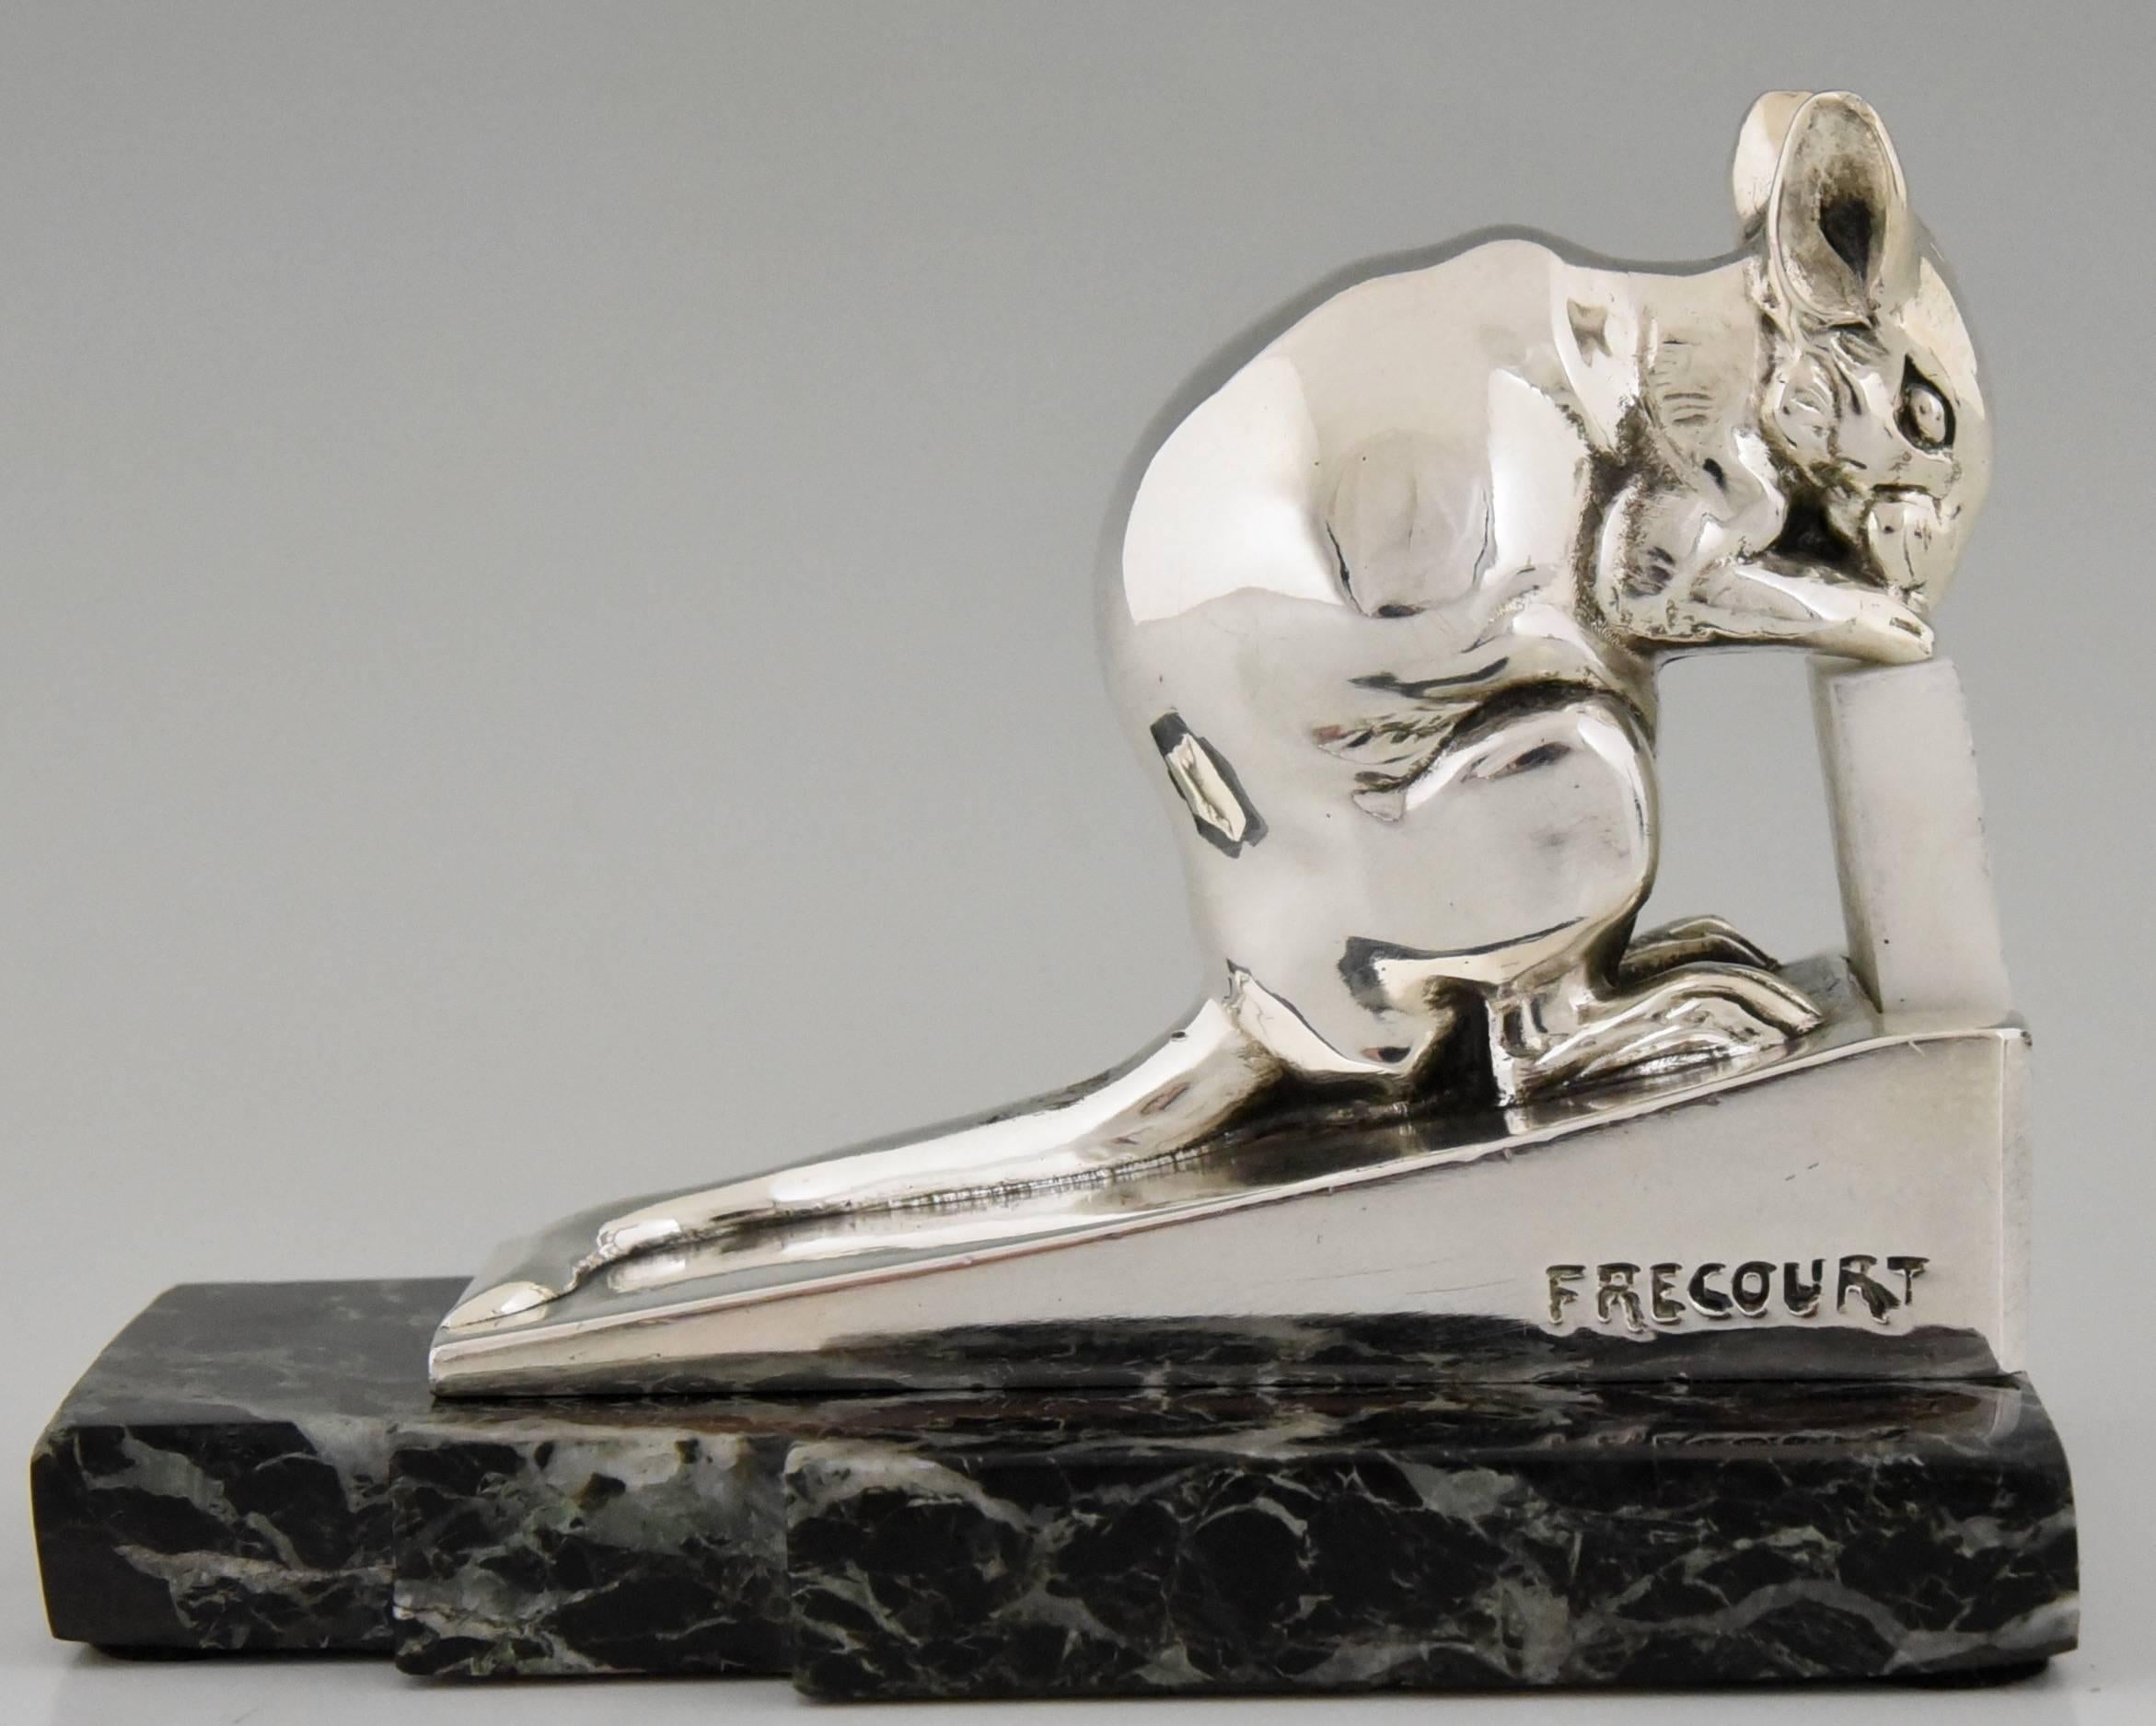 20th Century French Art Deco Slivered Mouse Bookends by Frecourt, 1930